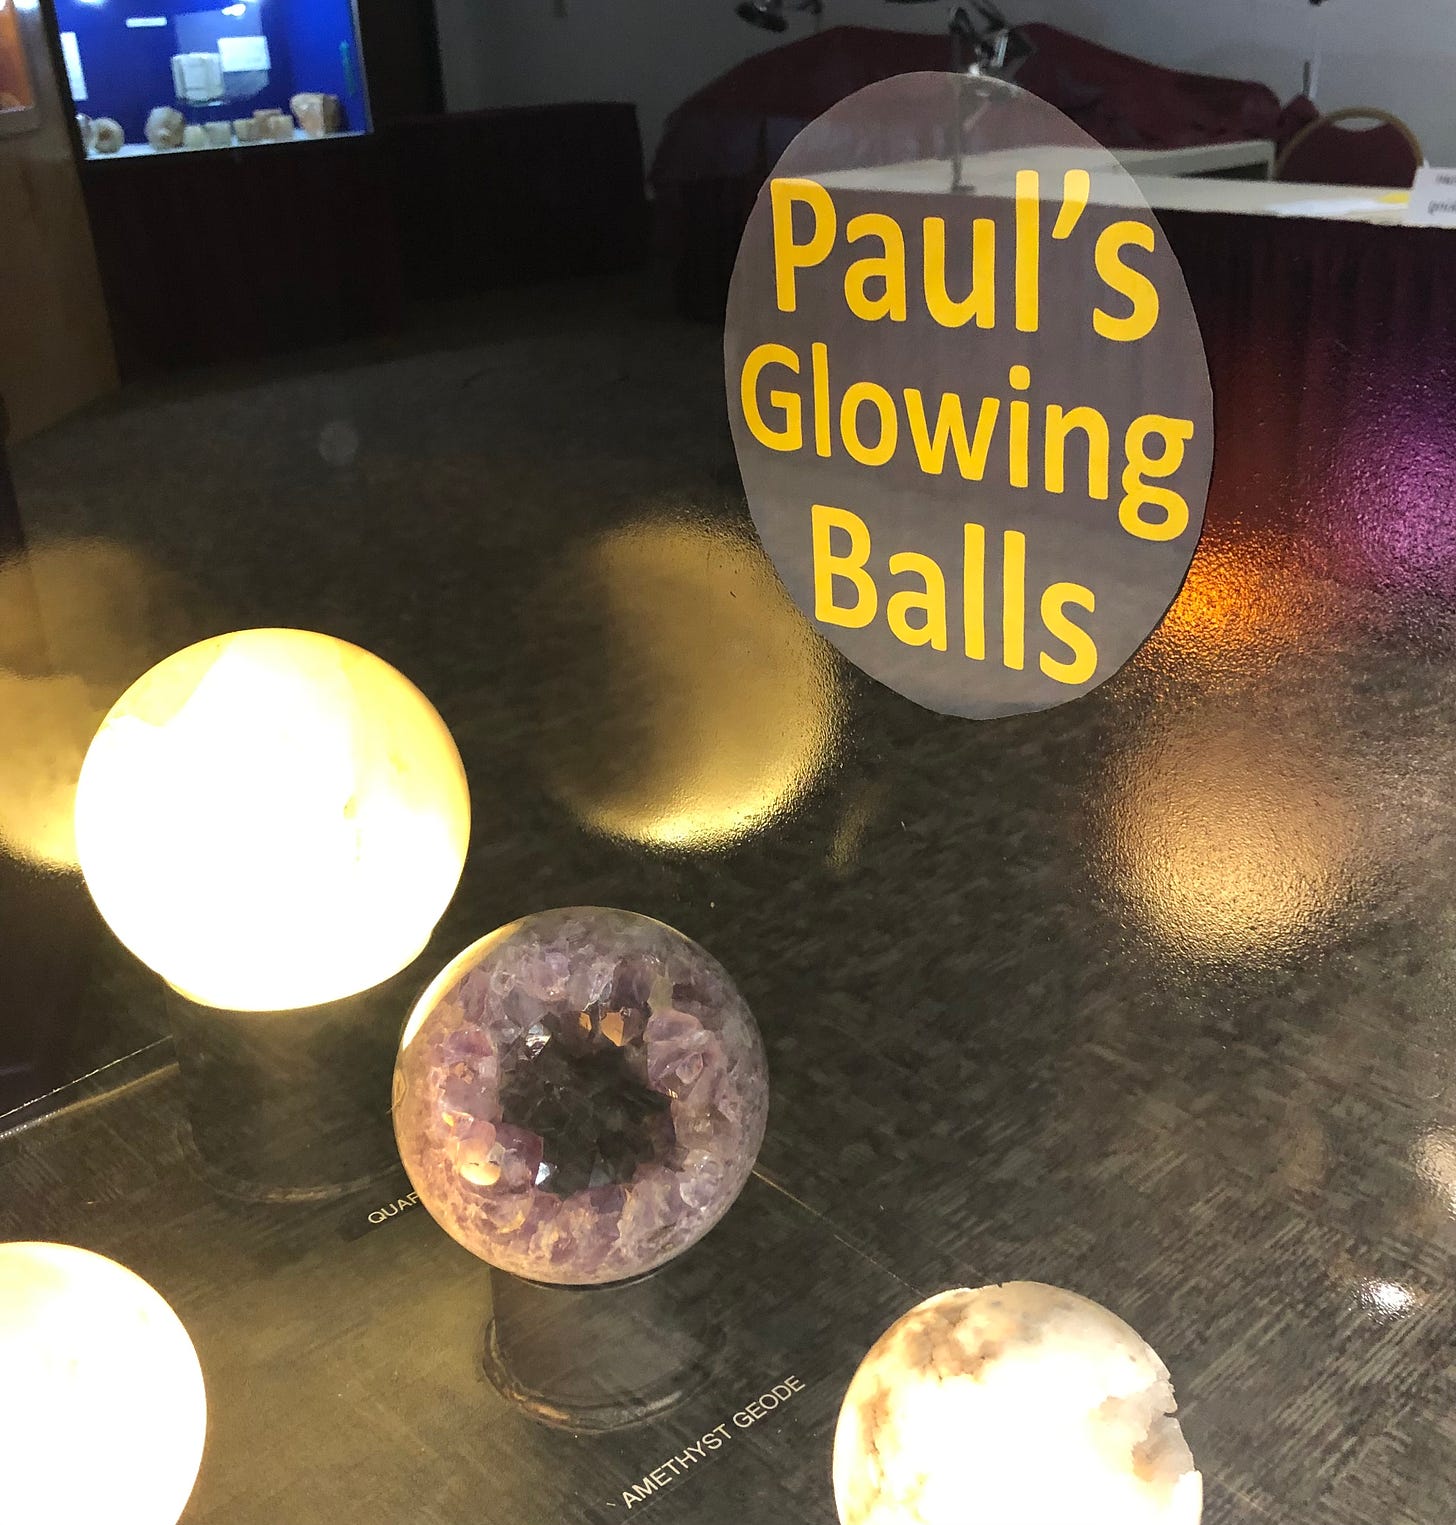 A display of geodes that are lighted from the inside entitled “Paul’s Glowing Balls”.